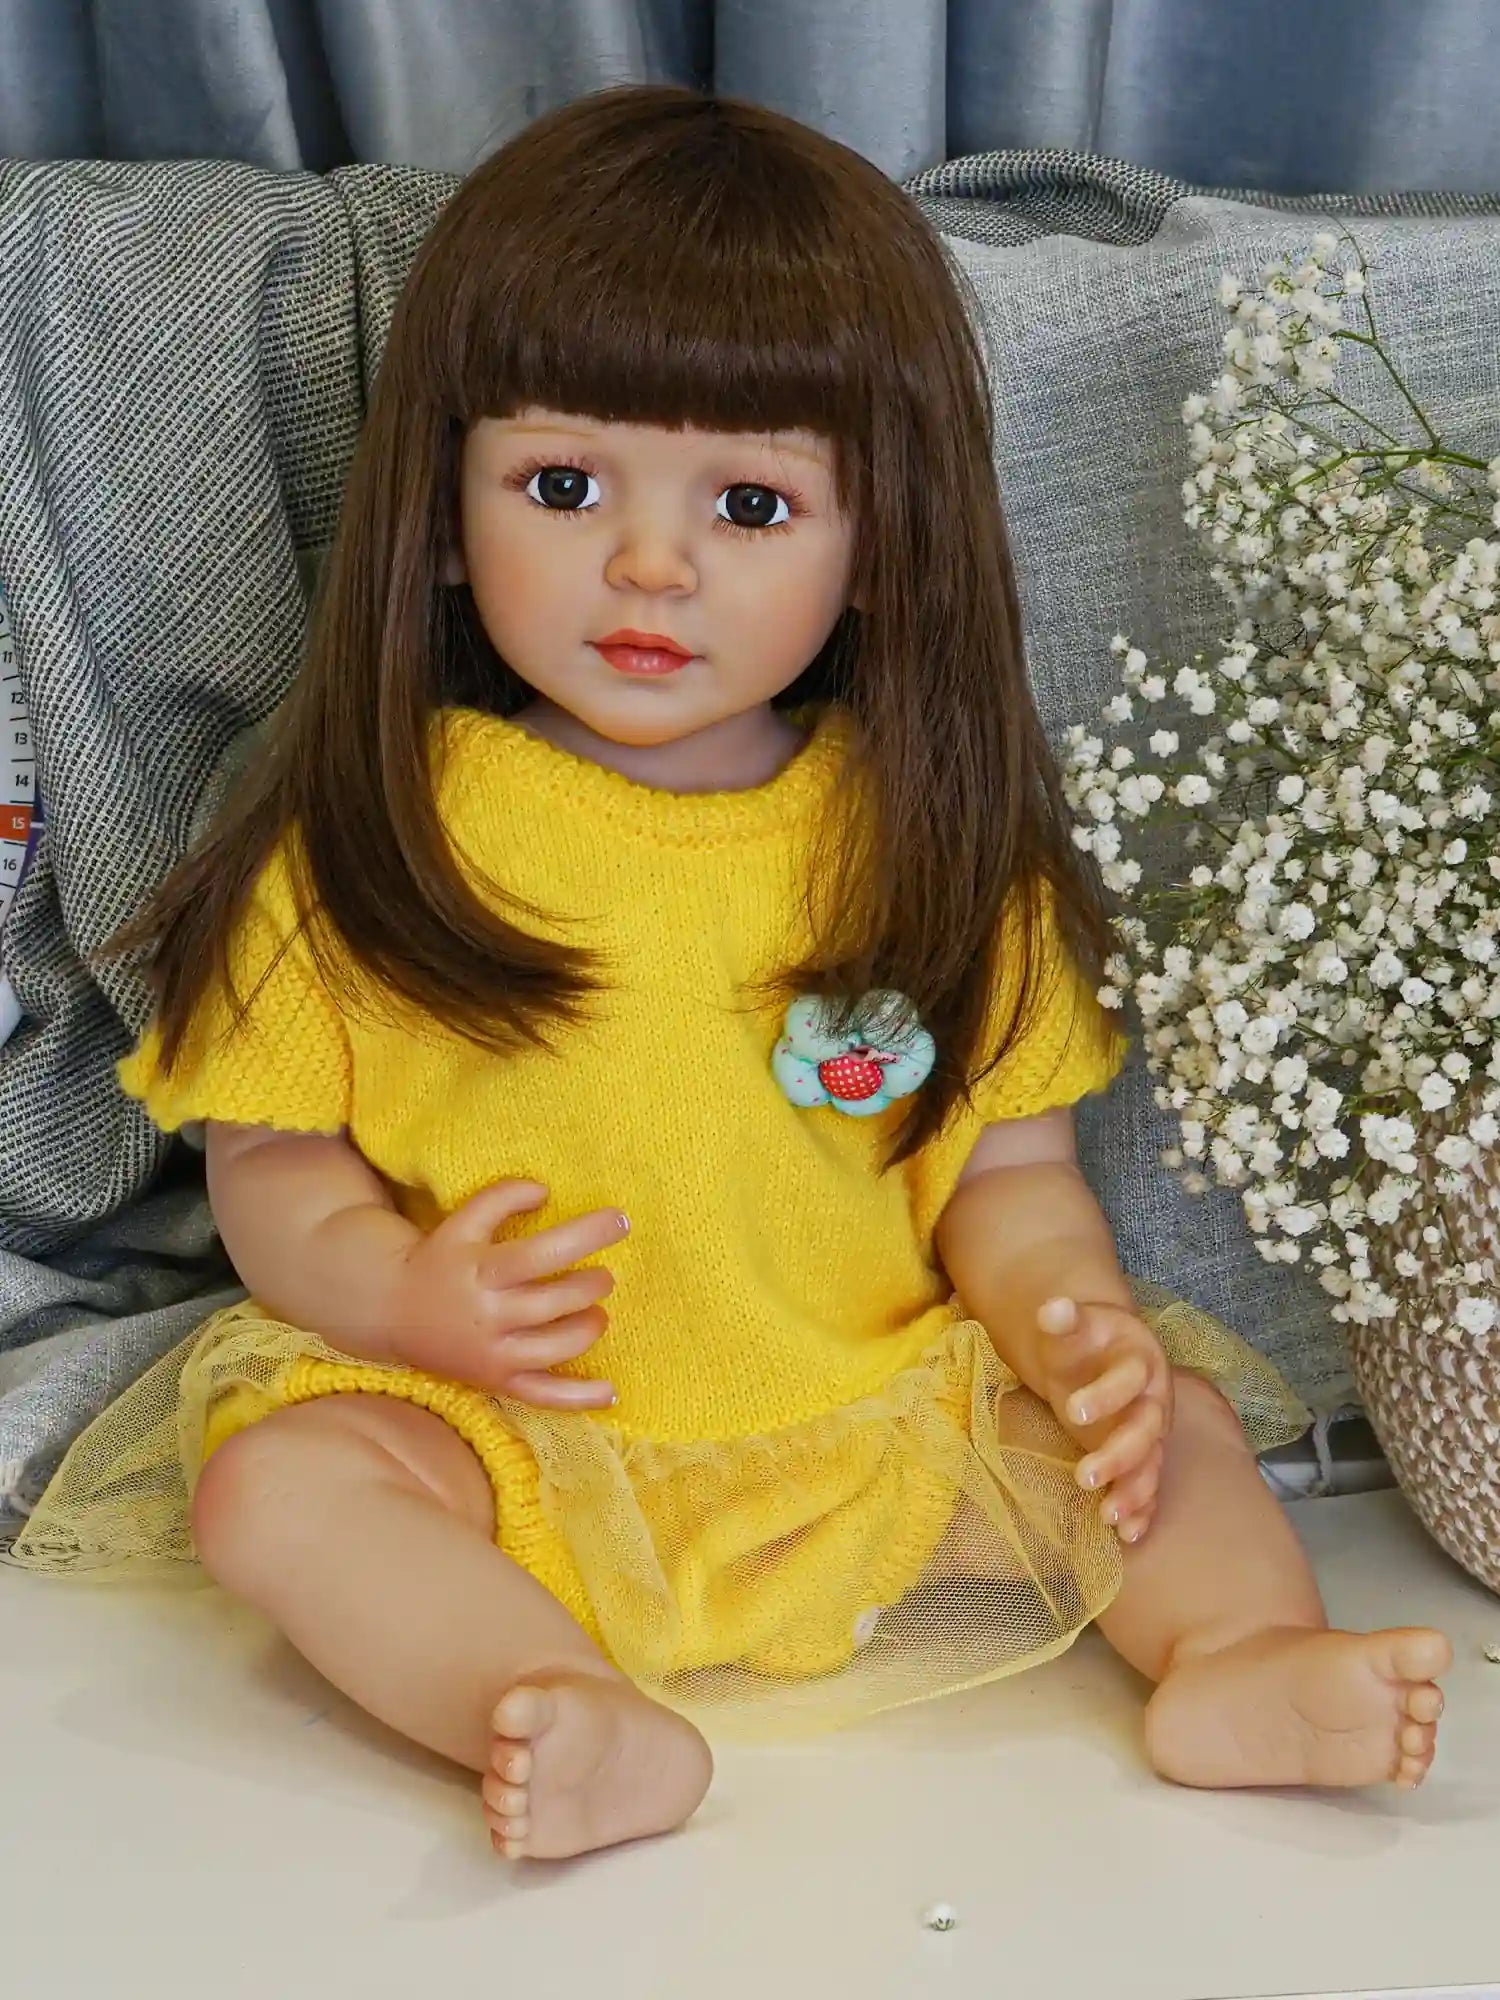 Charming reborn doll seated with a poised posture, wearing a knit yellow dress with a sheer layer, amidst a backdrop of a chic living space with a patterned throw.